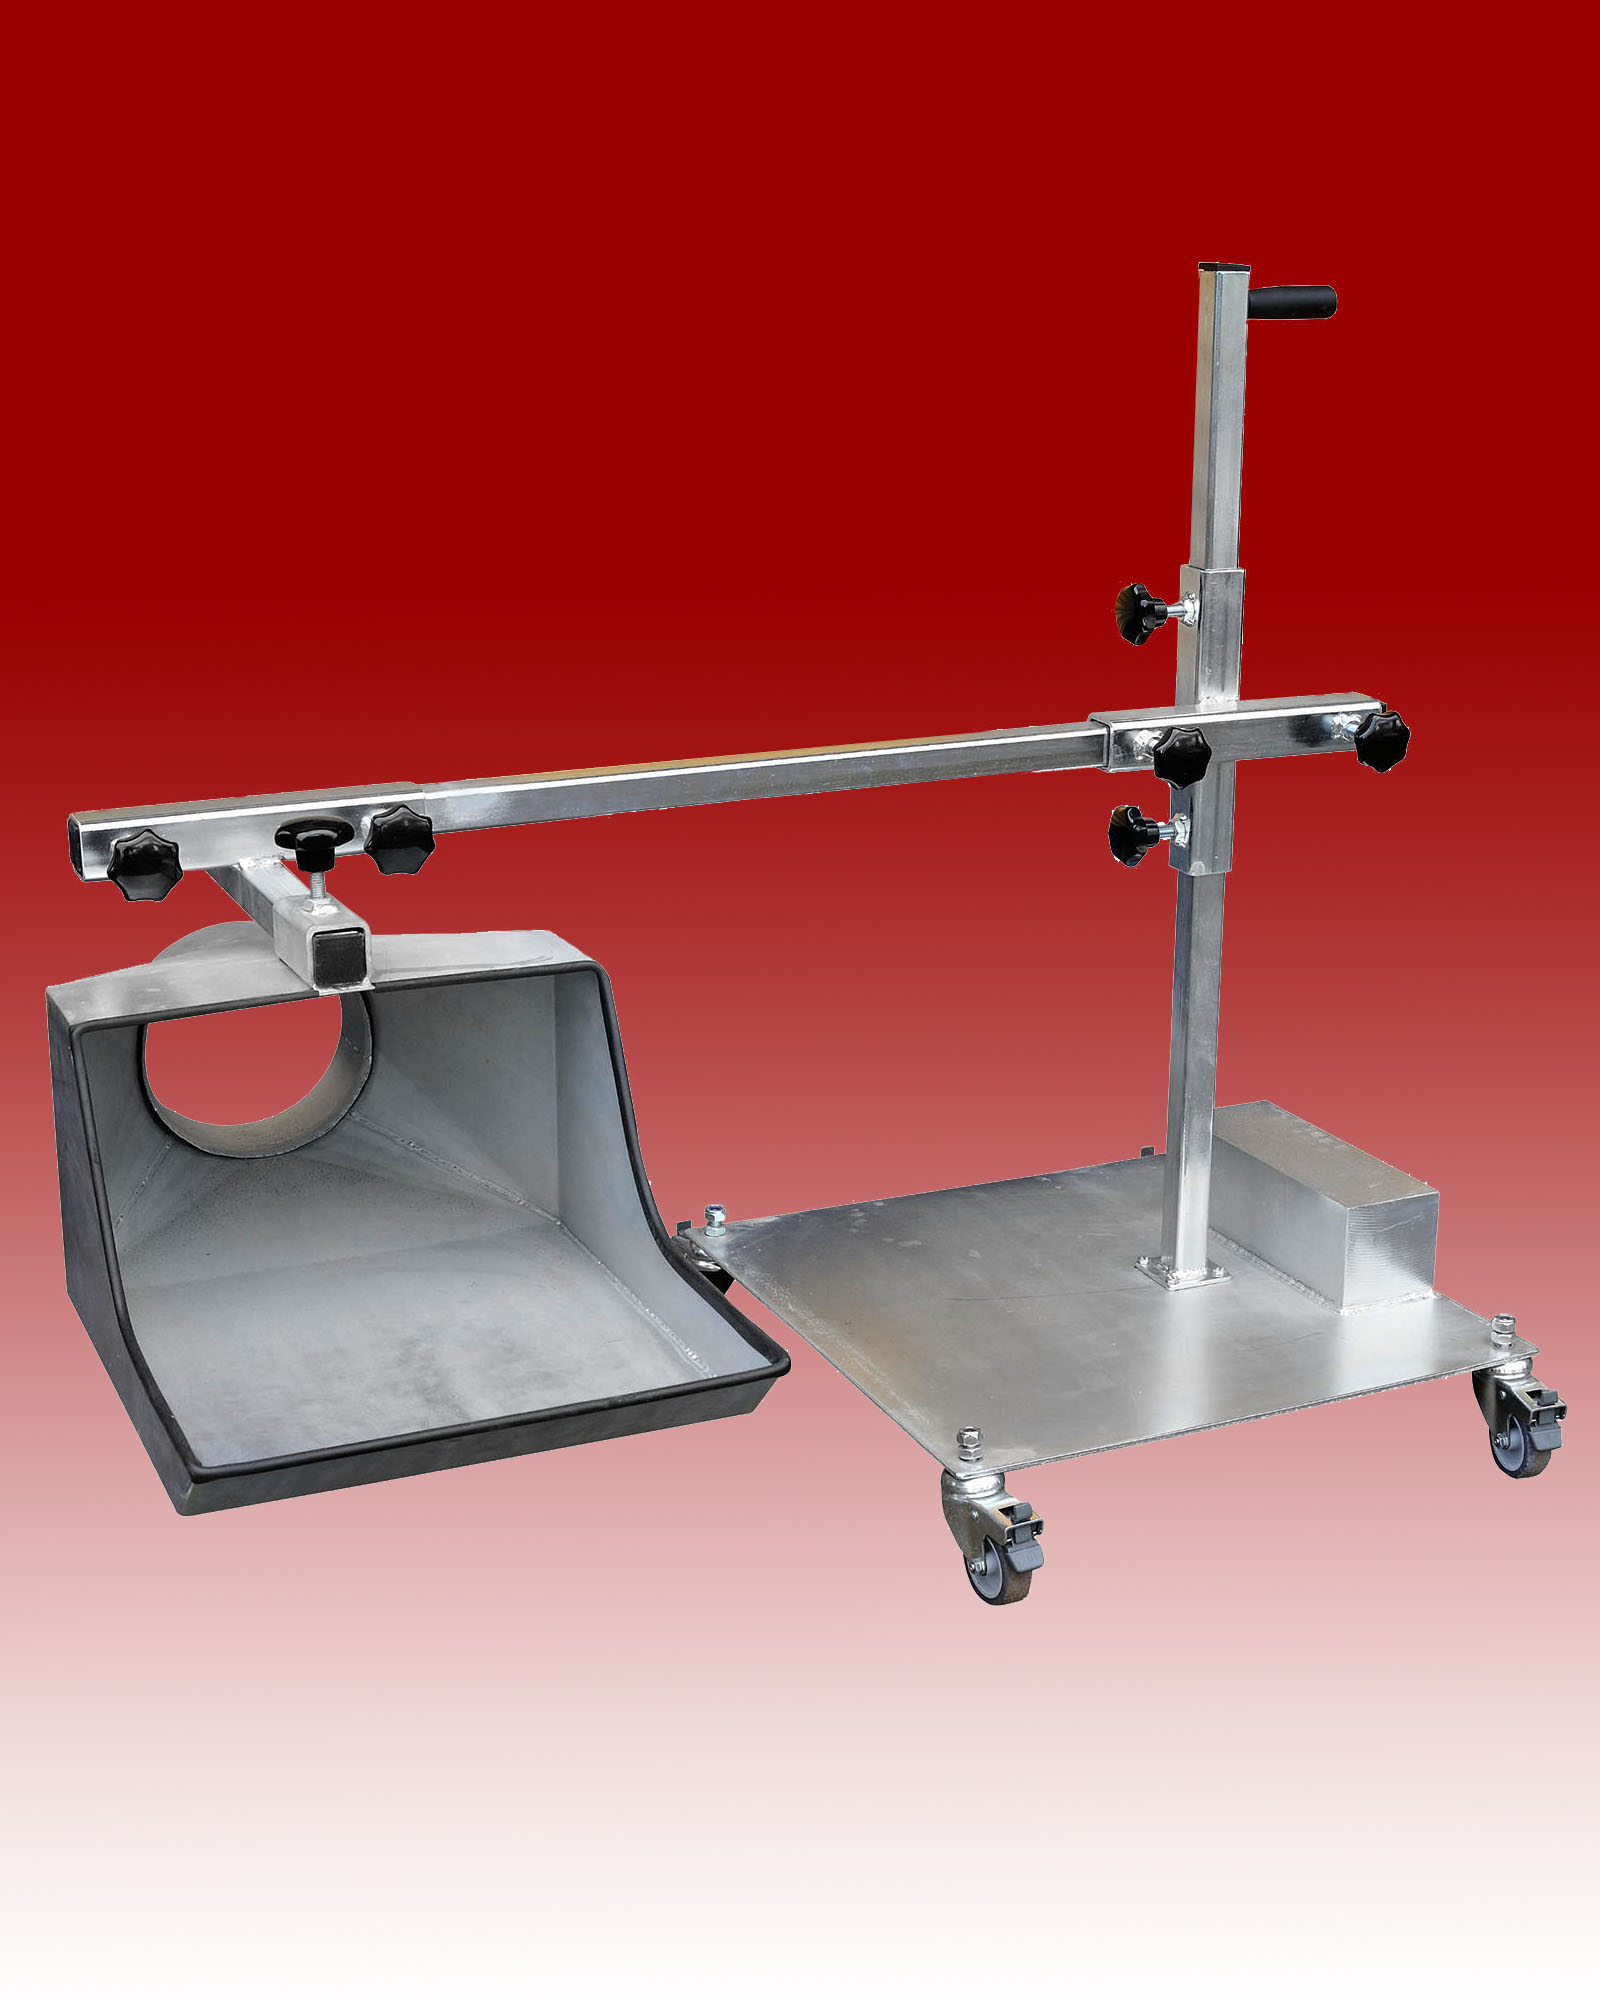 Free-Standing Tray on Extended Arm